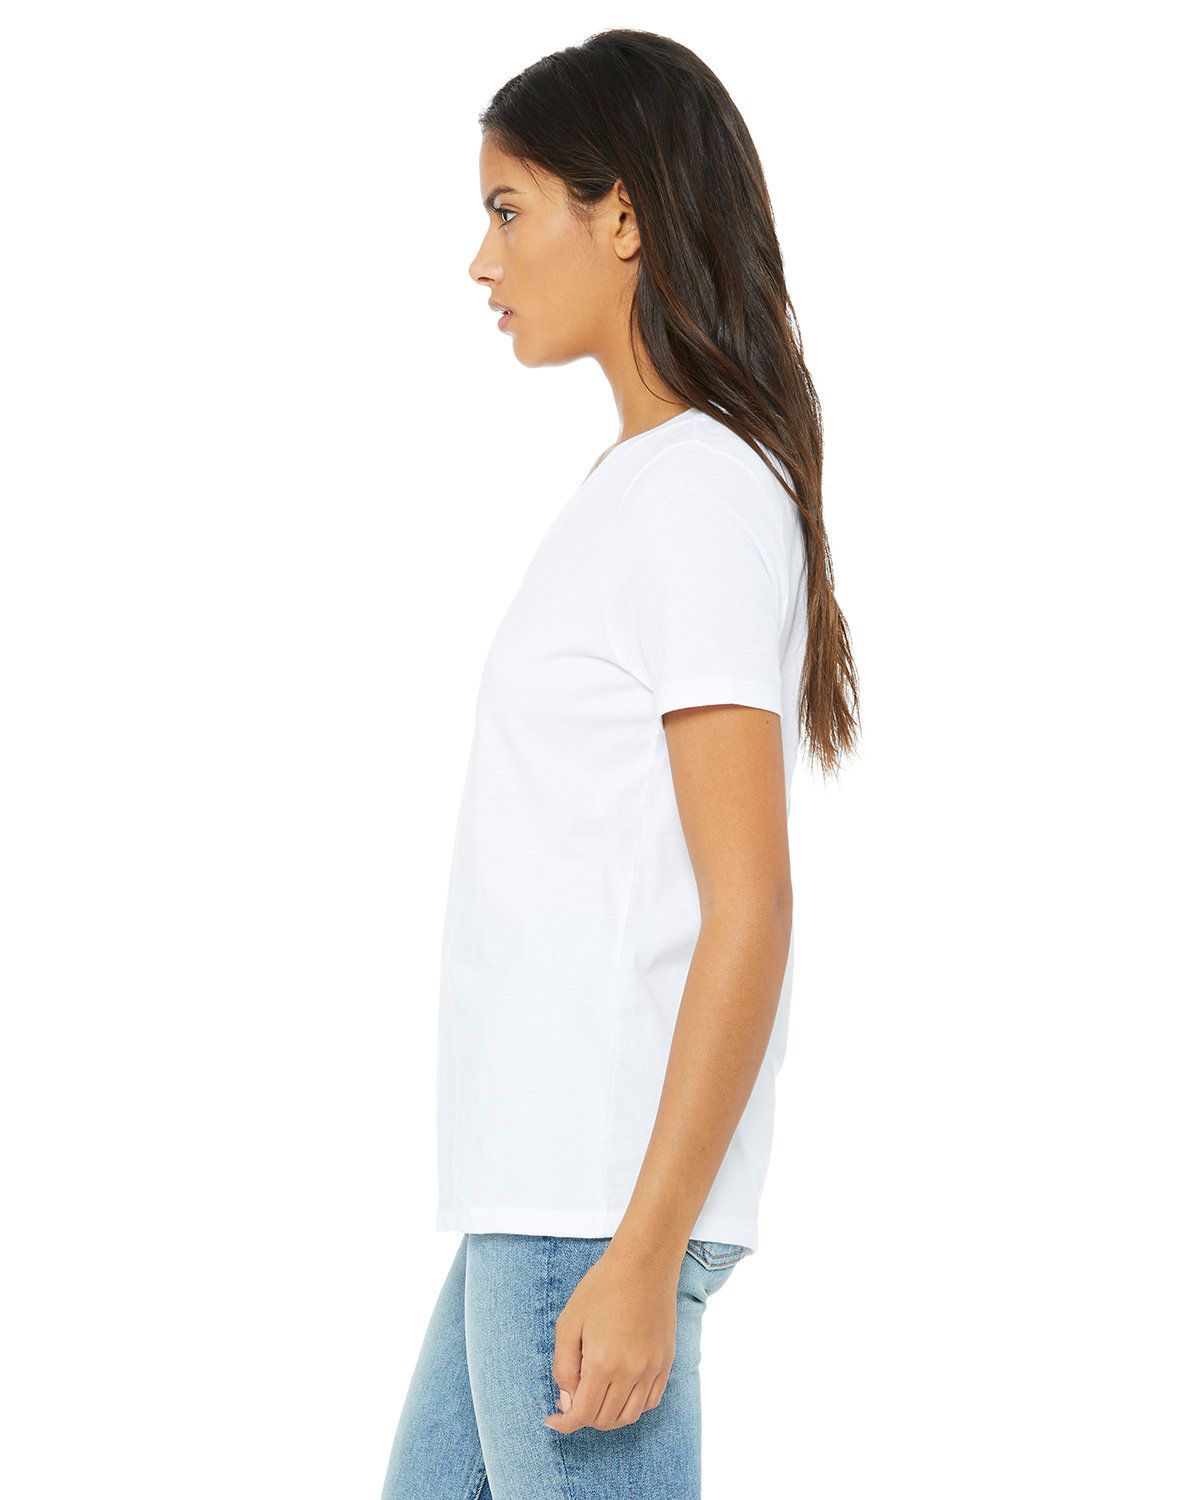 'Bella Canvas 6405 Ladies Relaxed Jersey V Neck T Shirt'